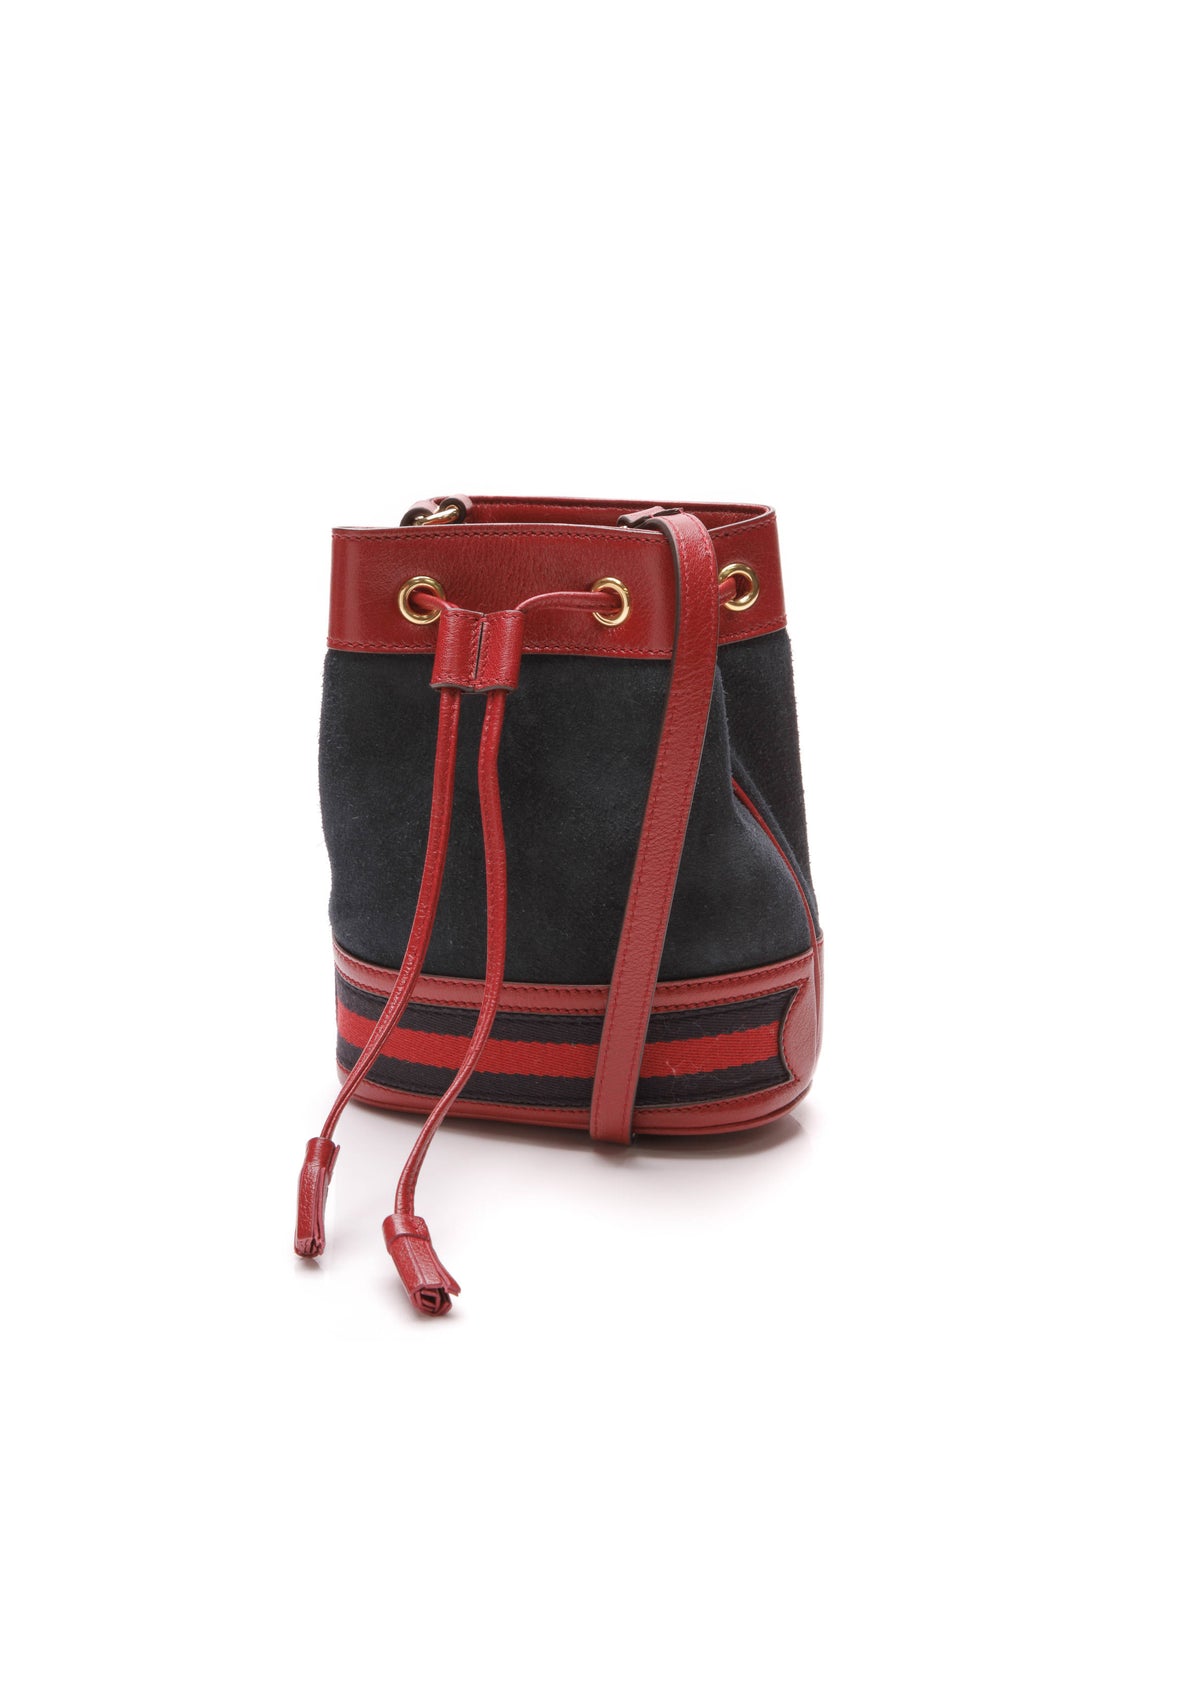 Gucci Red Ophidia Suede Mini Bag